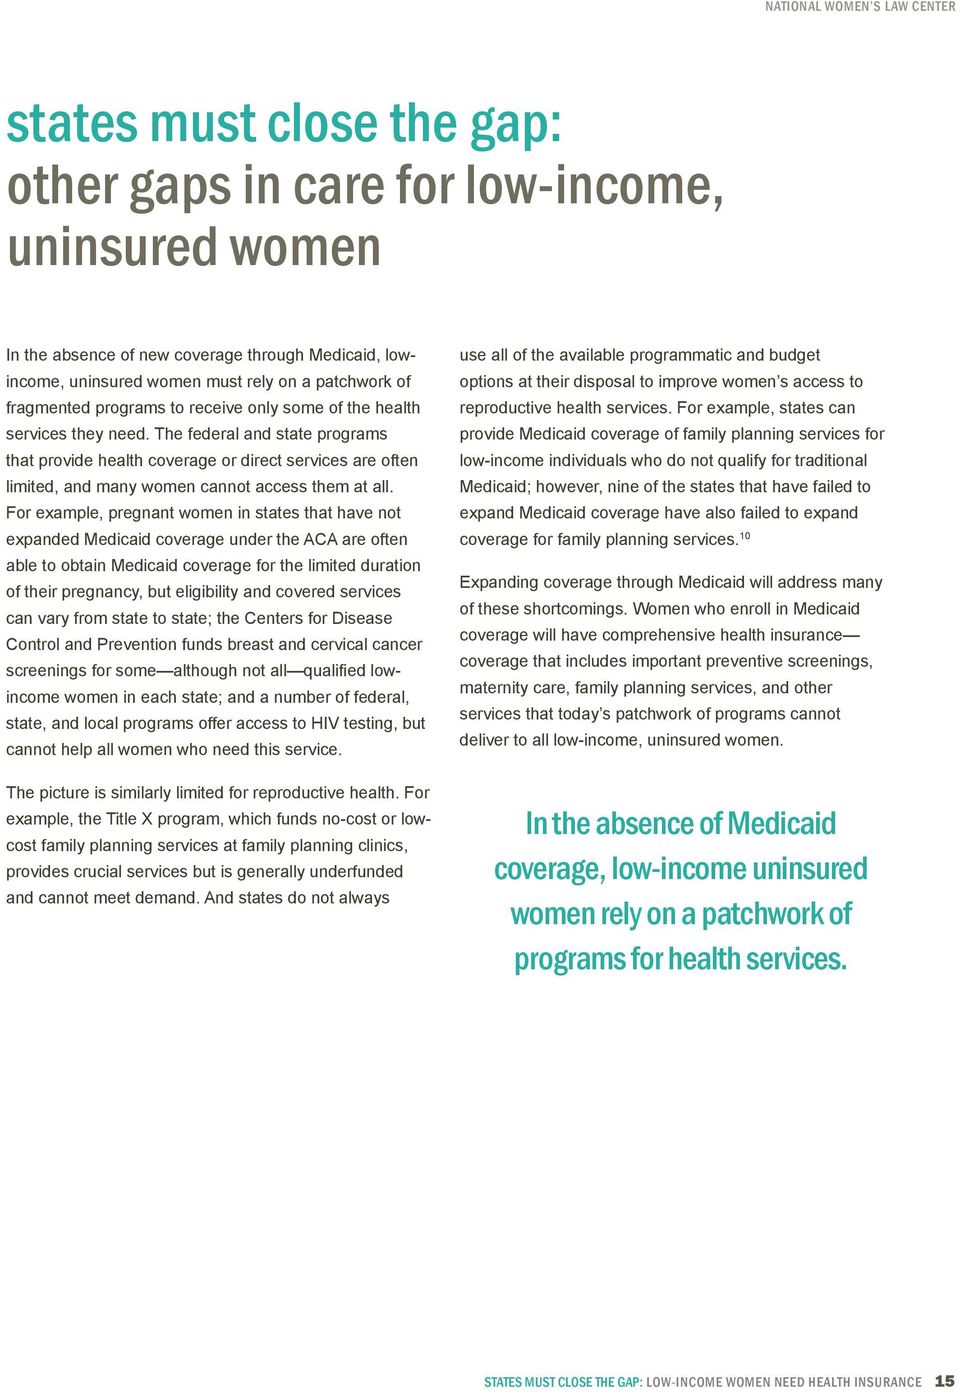 The federal and state programs that provide health coverage or direct services are often limited, and many women cannot access them at all.